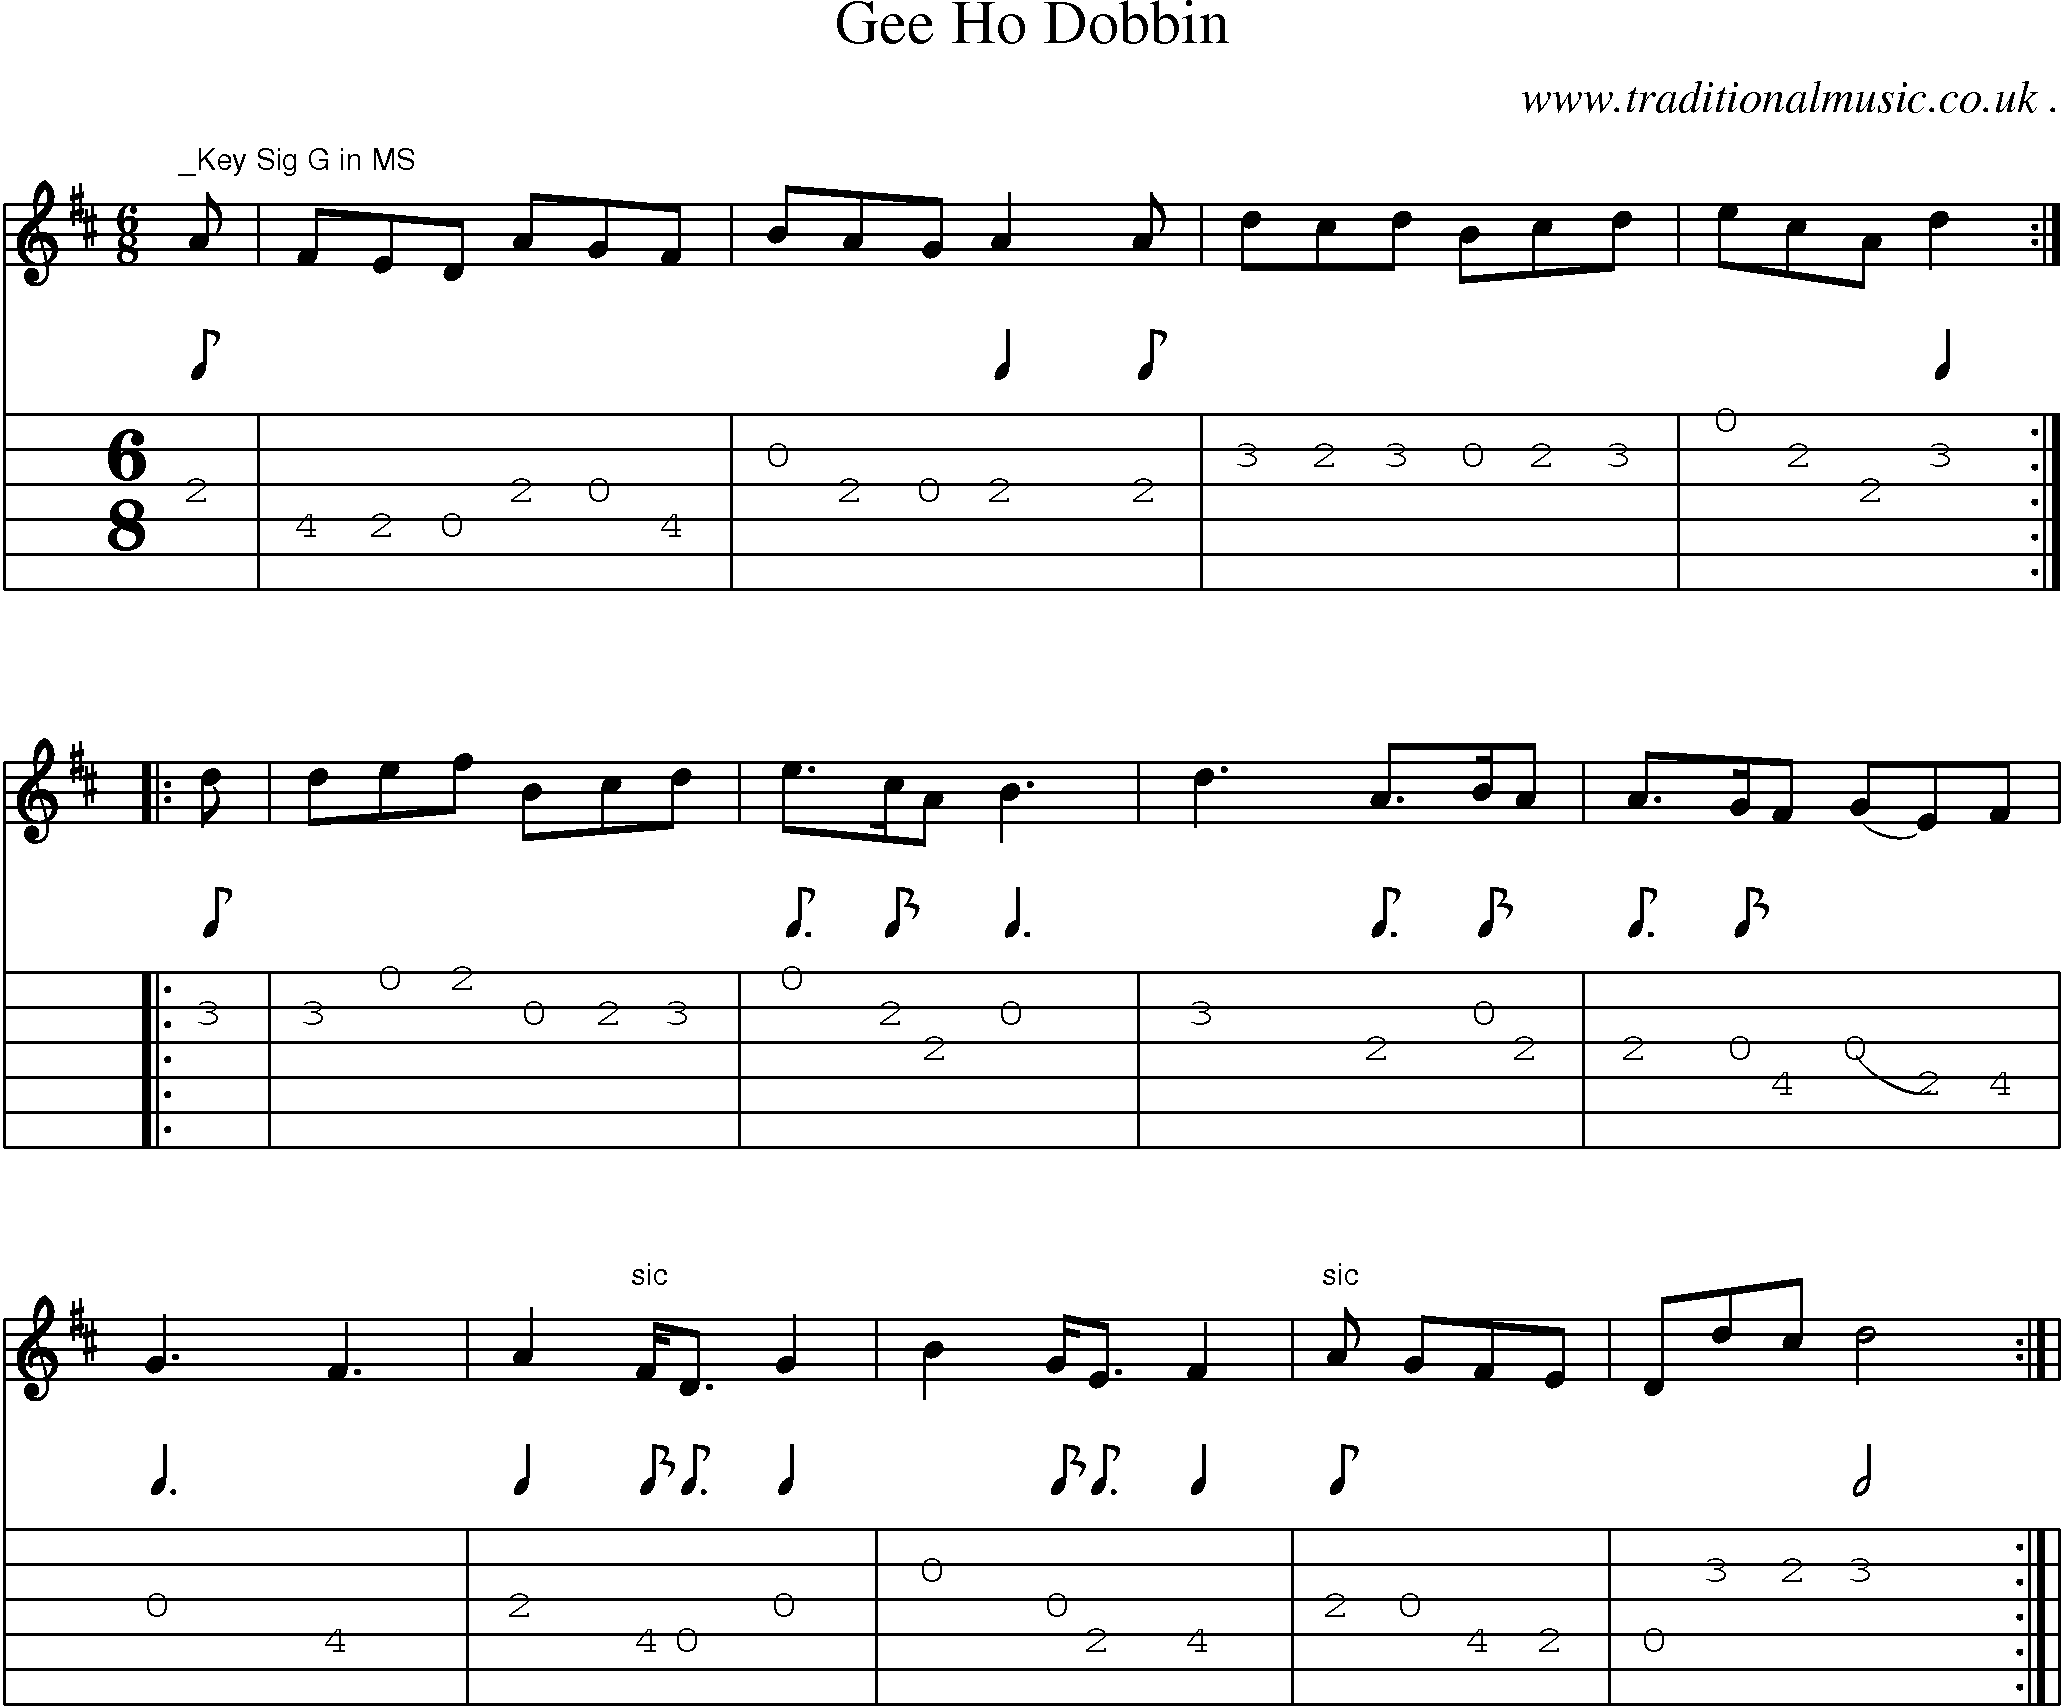 Sheet-Music and Guitar Tabs for Gee Ho Dobbin